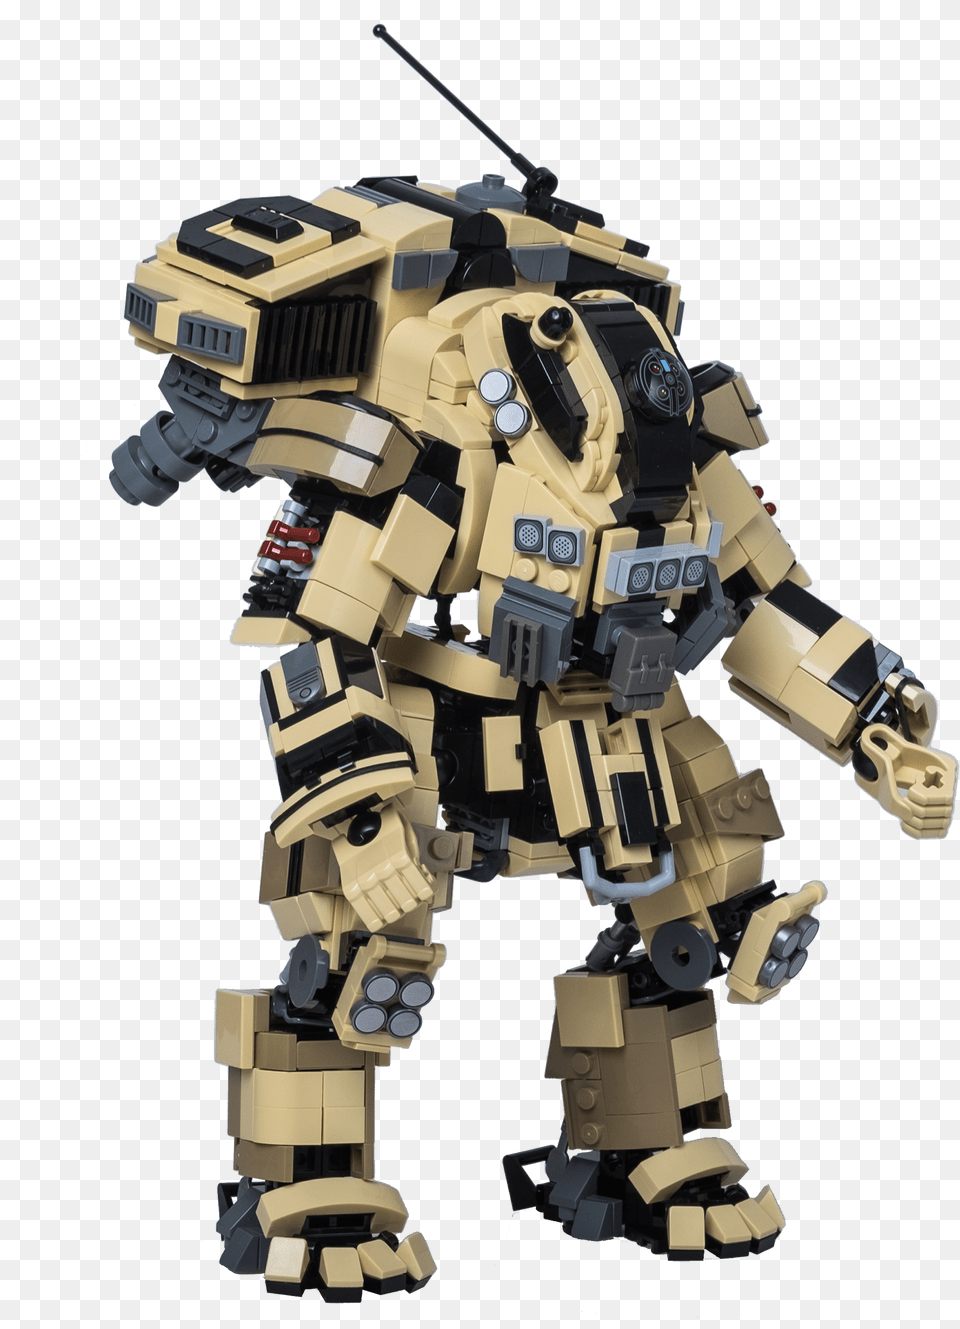 Lego Titanfall 2 Scorch, Robot, Toy Png Image